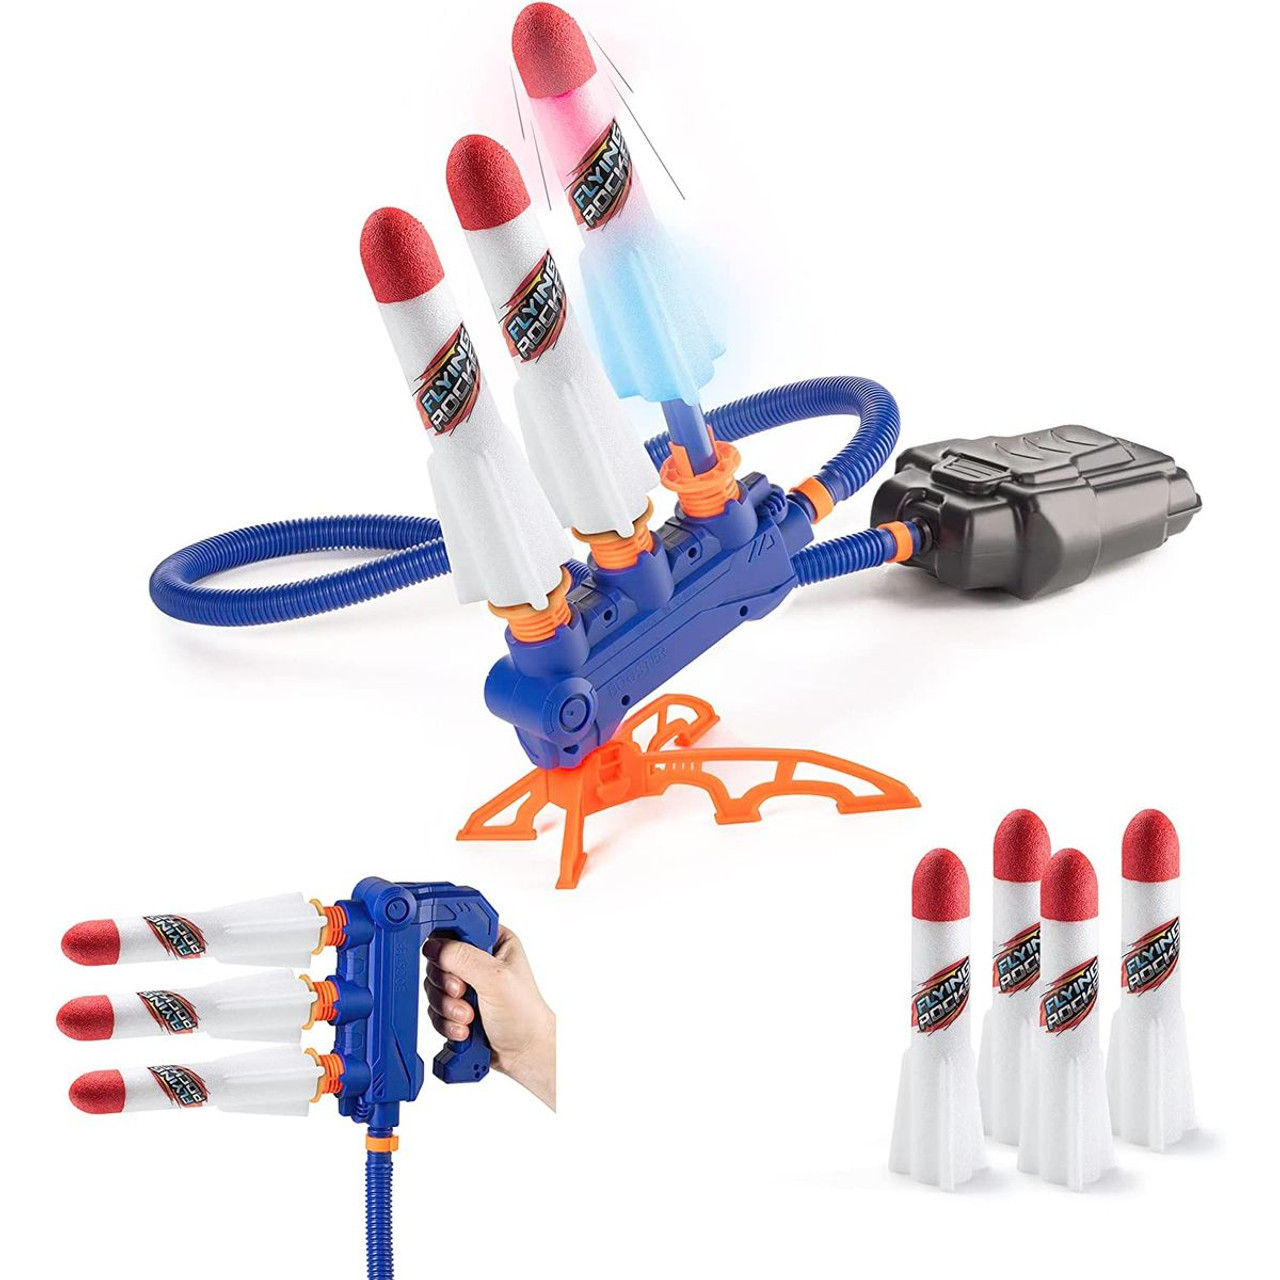 Kids' 2-in-1 Rocket Launcher with Launch Pad product image